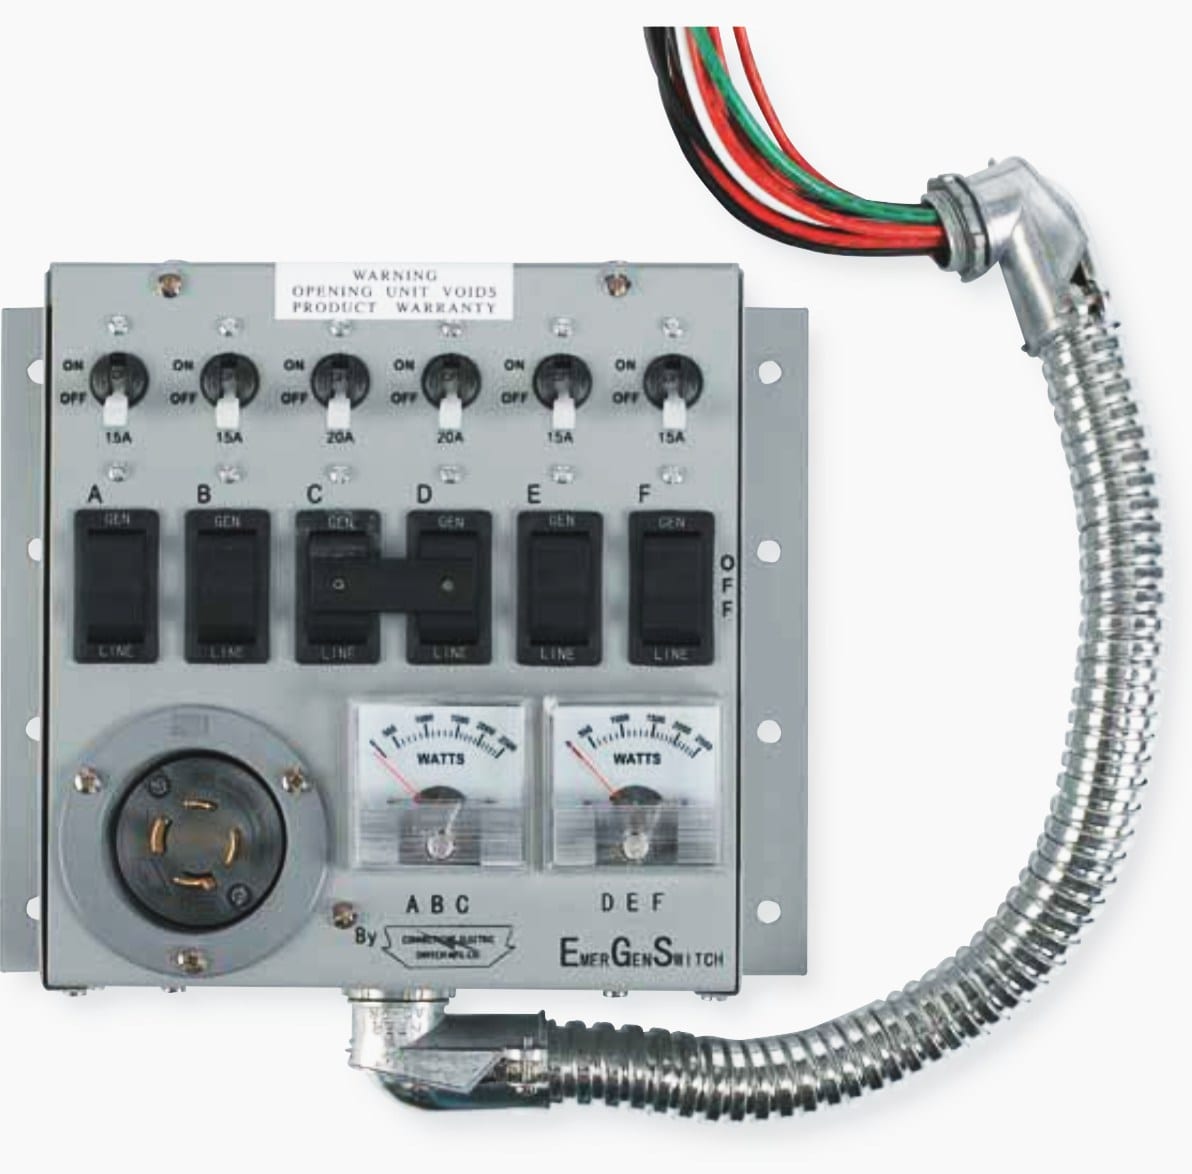 4. Step 4 - Connect The Transfer Switch